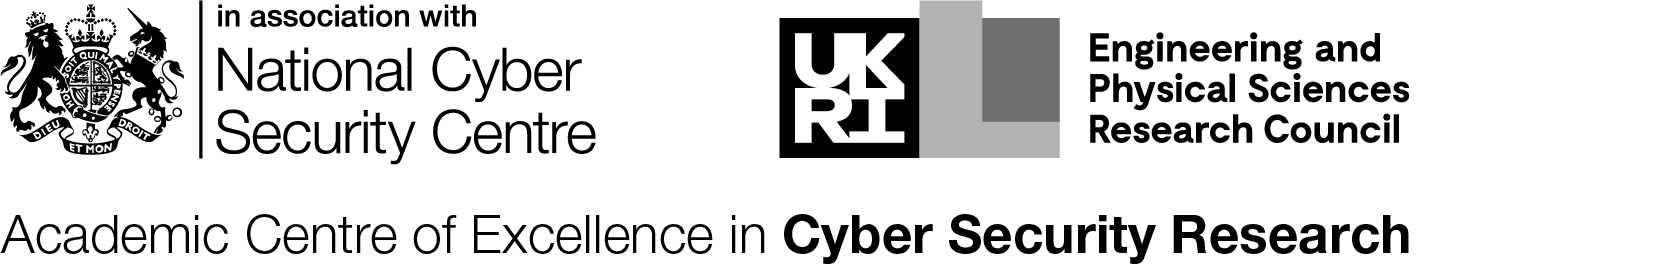 Logos: National Cyber Security Centre. Engineering and Physical Sciences Research Council